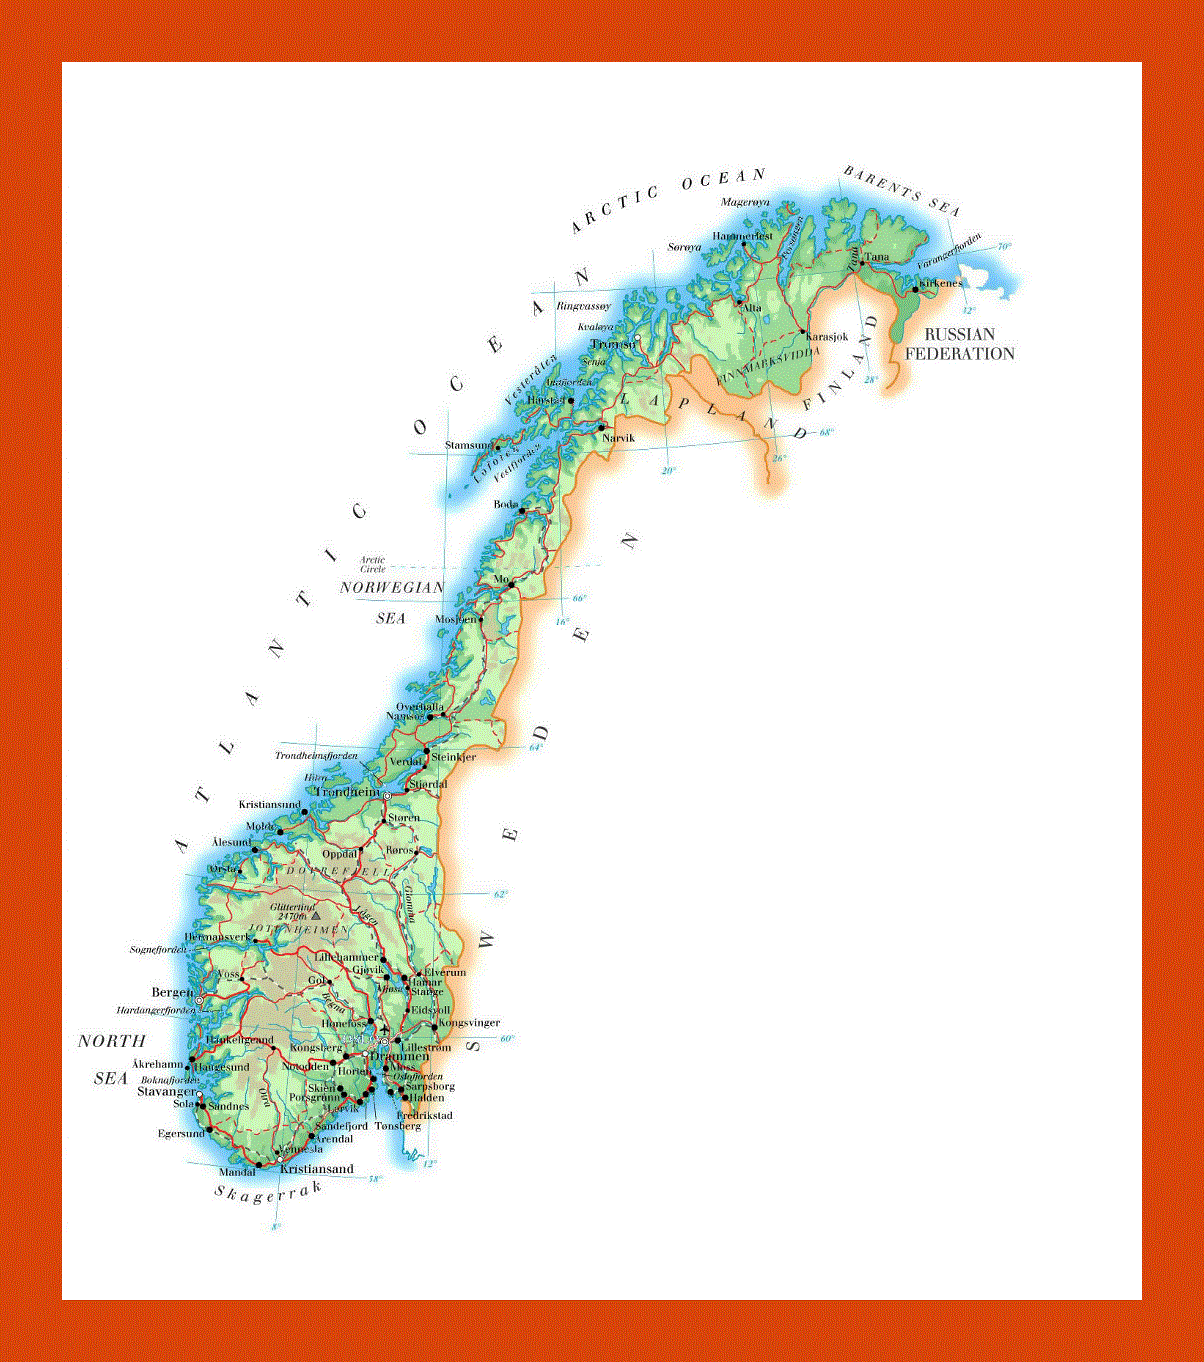 Elevation map of Norway